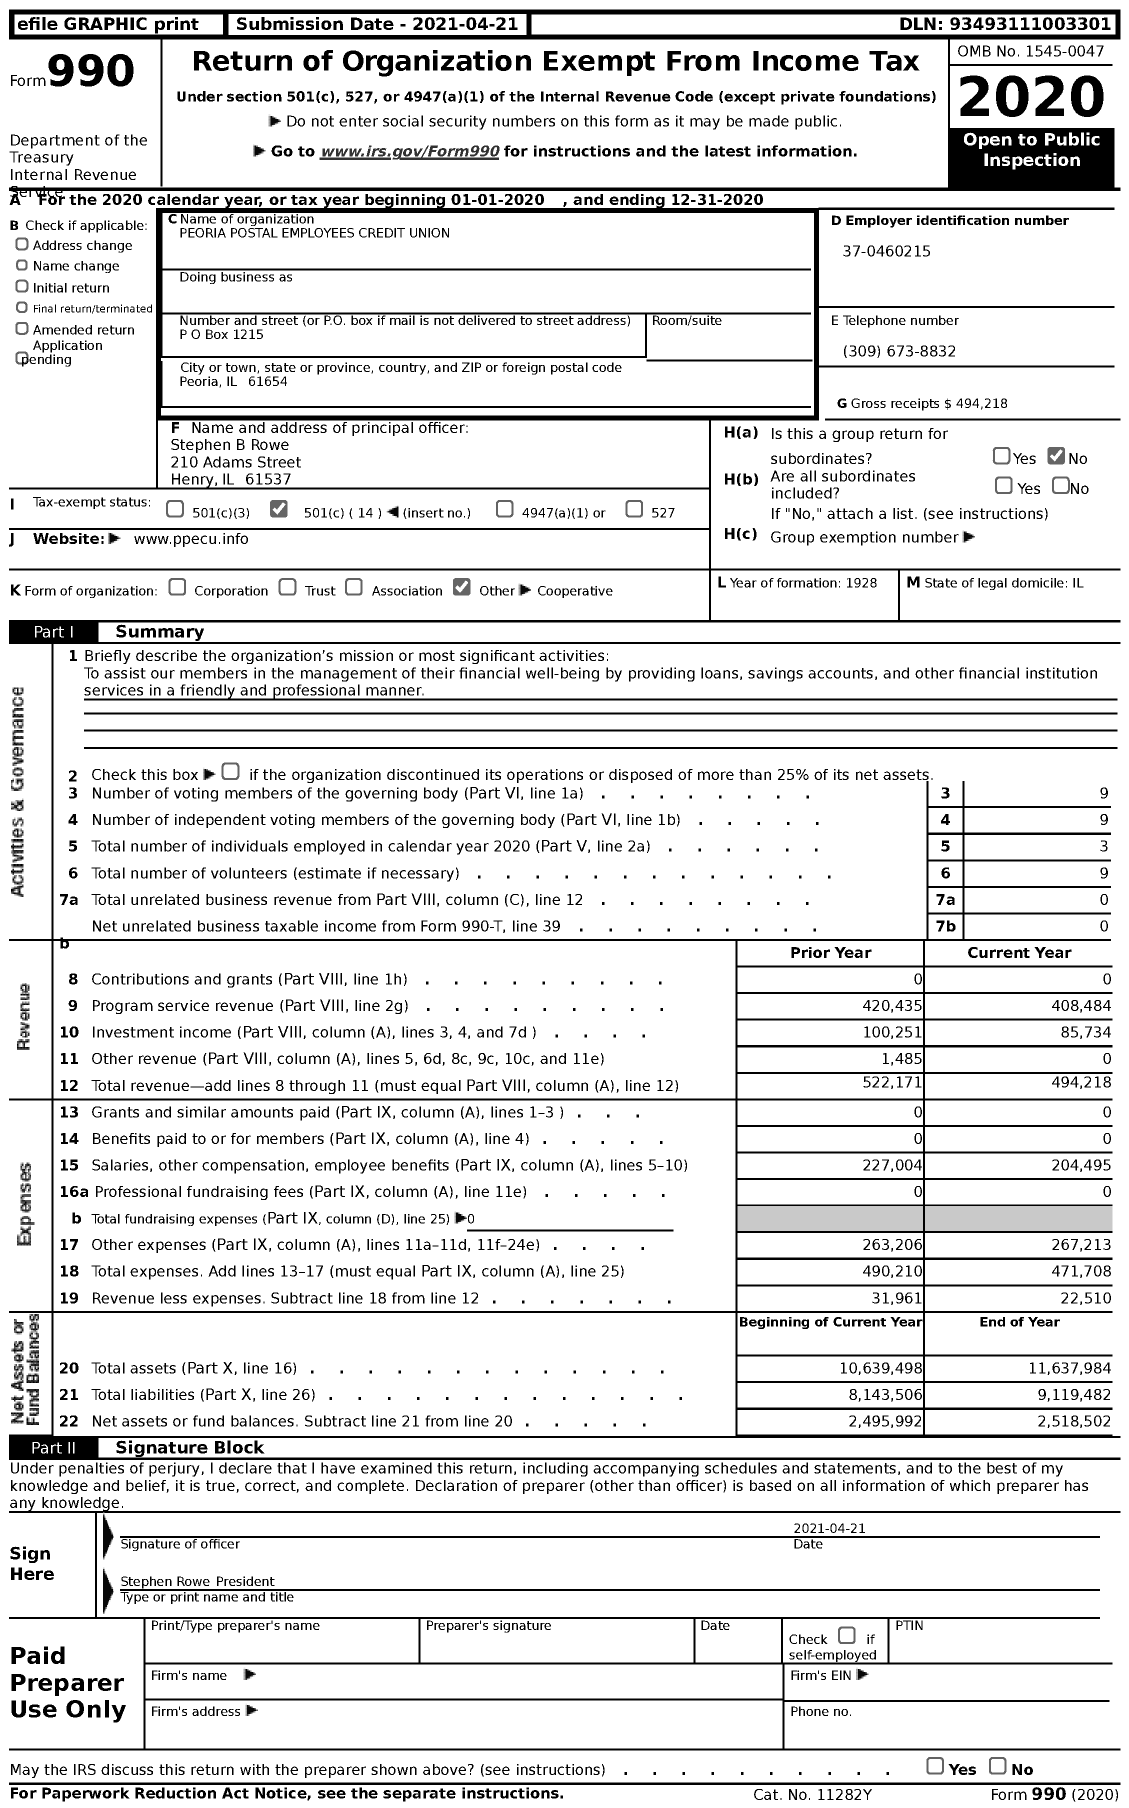 Image of first page of 2020 Form 990 for Peoria Postal Employees Credit Union